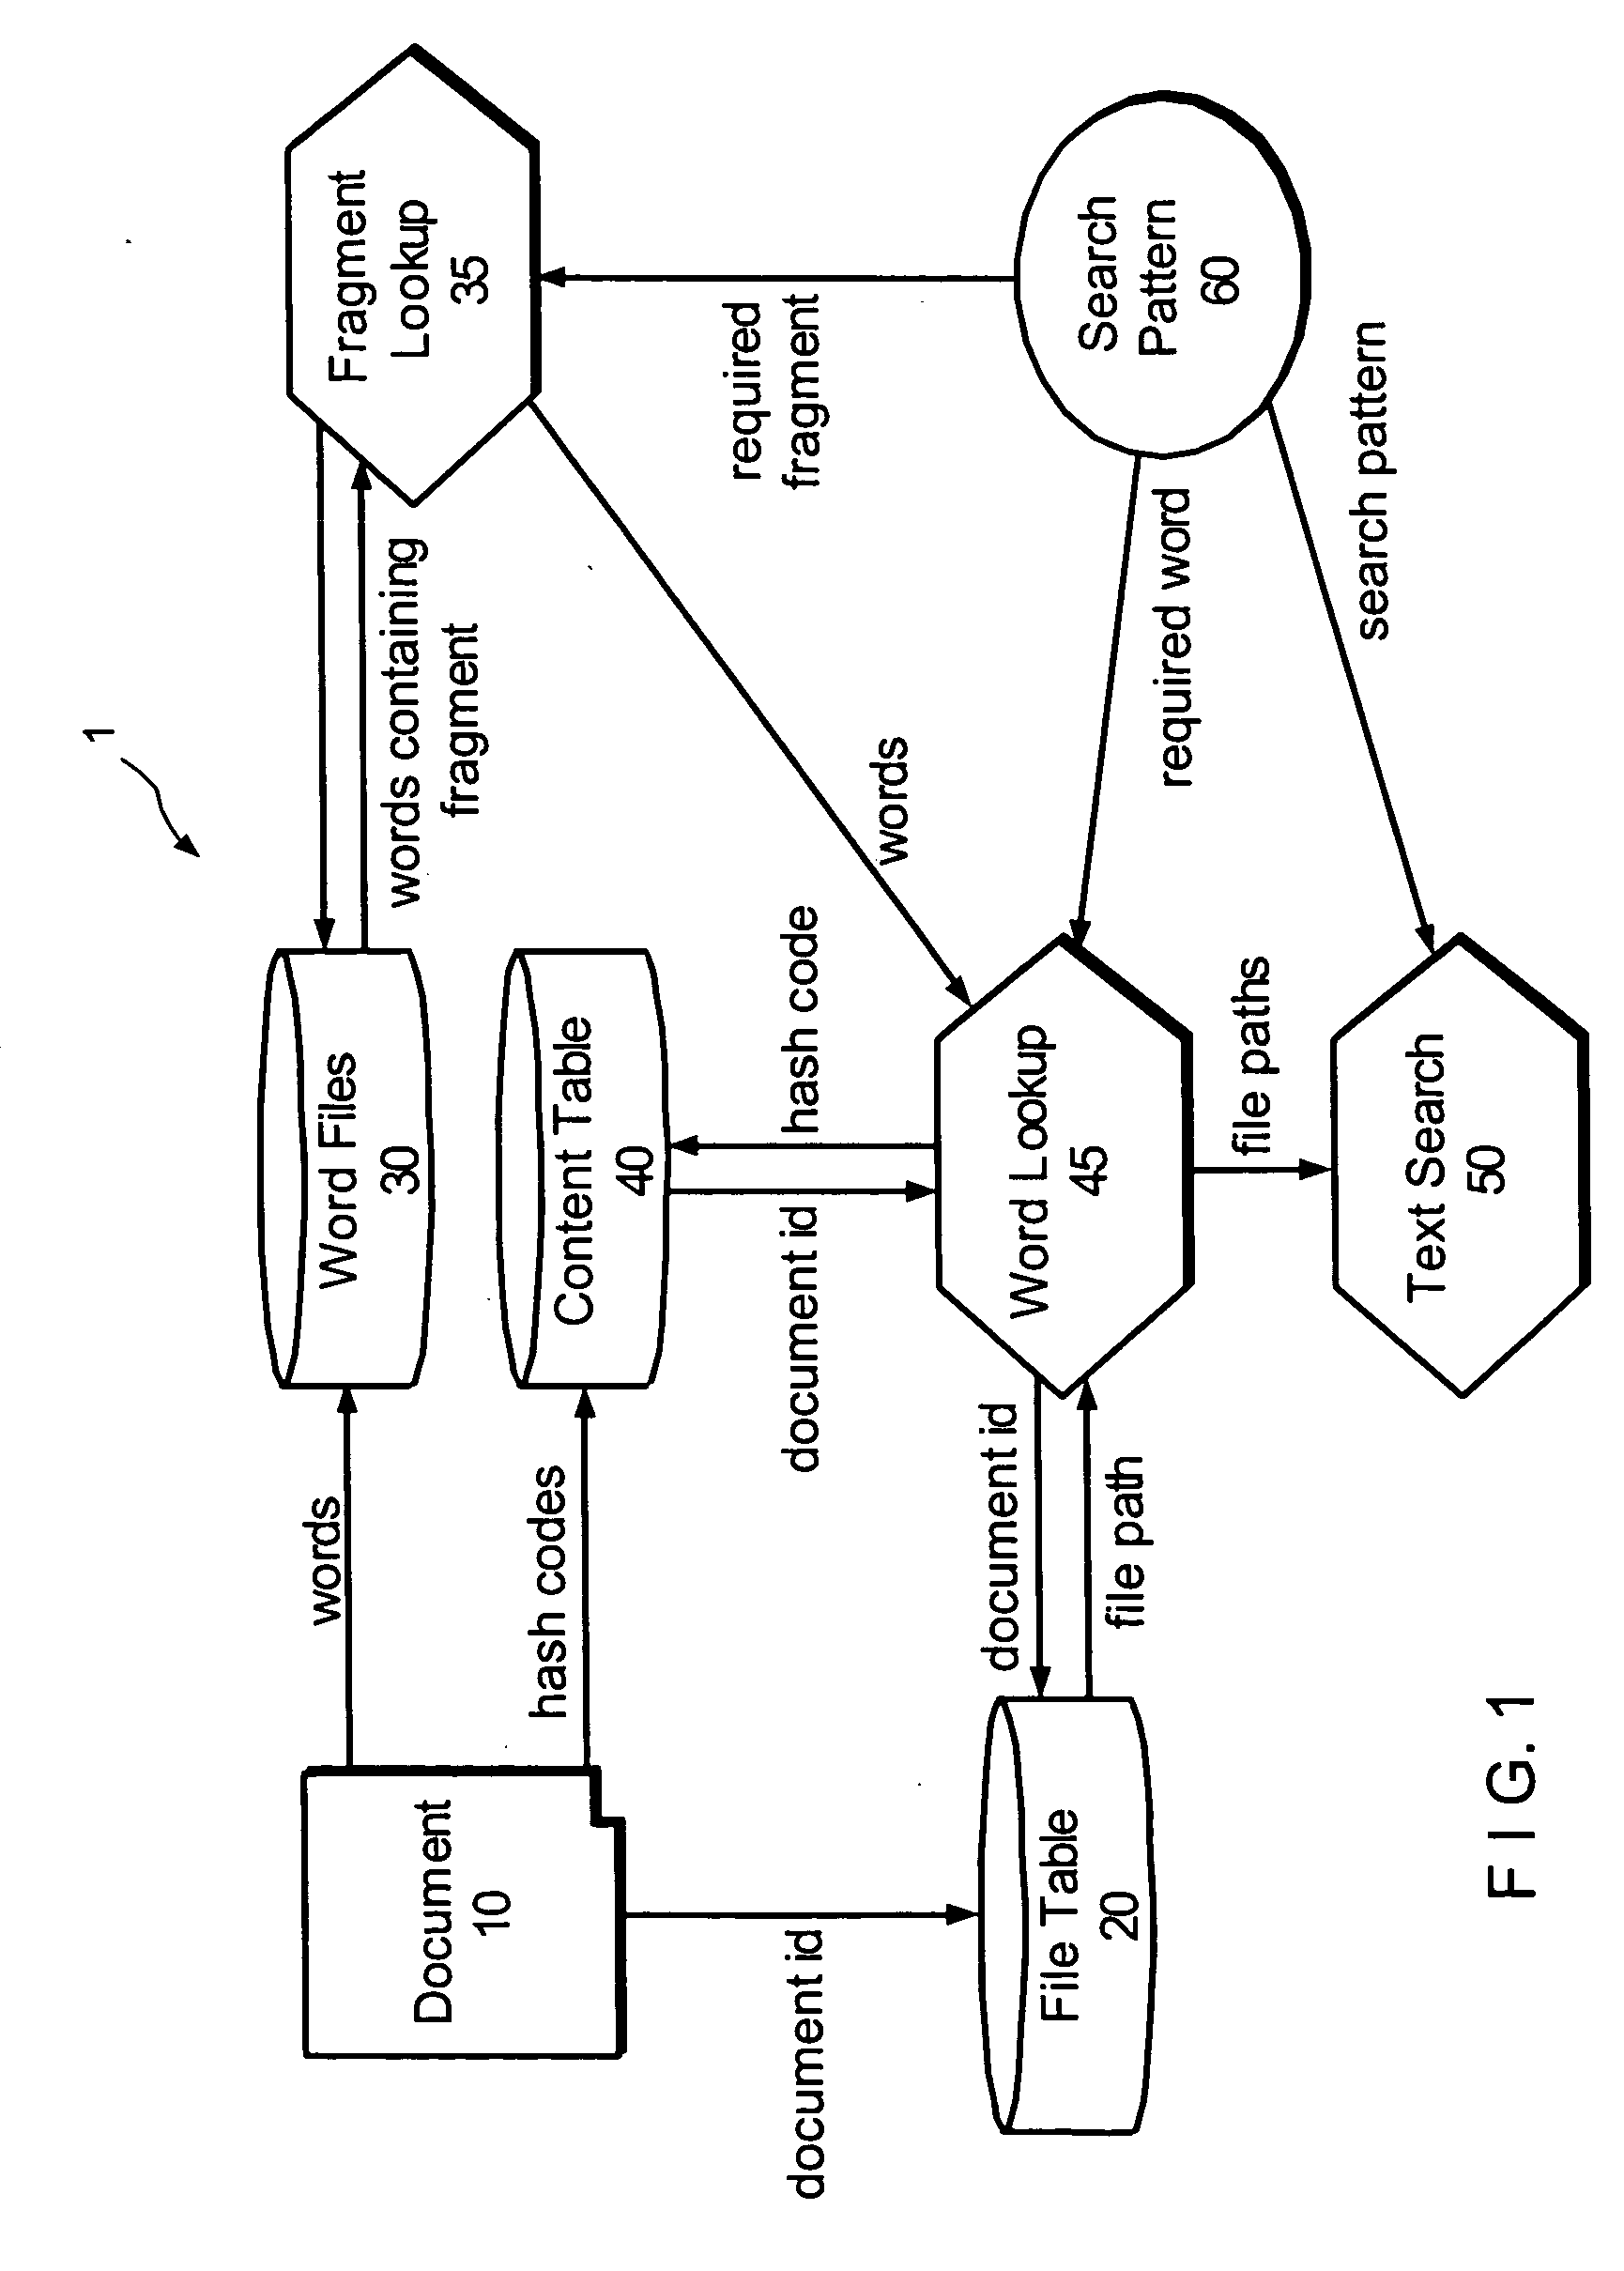 System and method for data indexing and retrieval